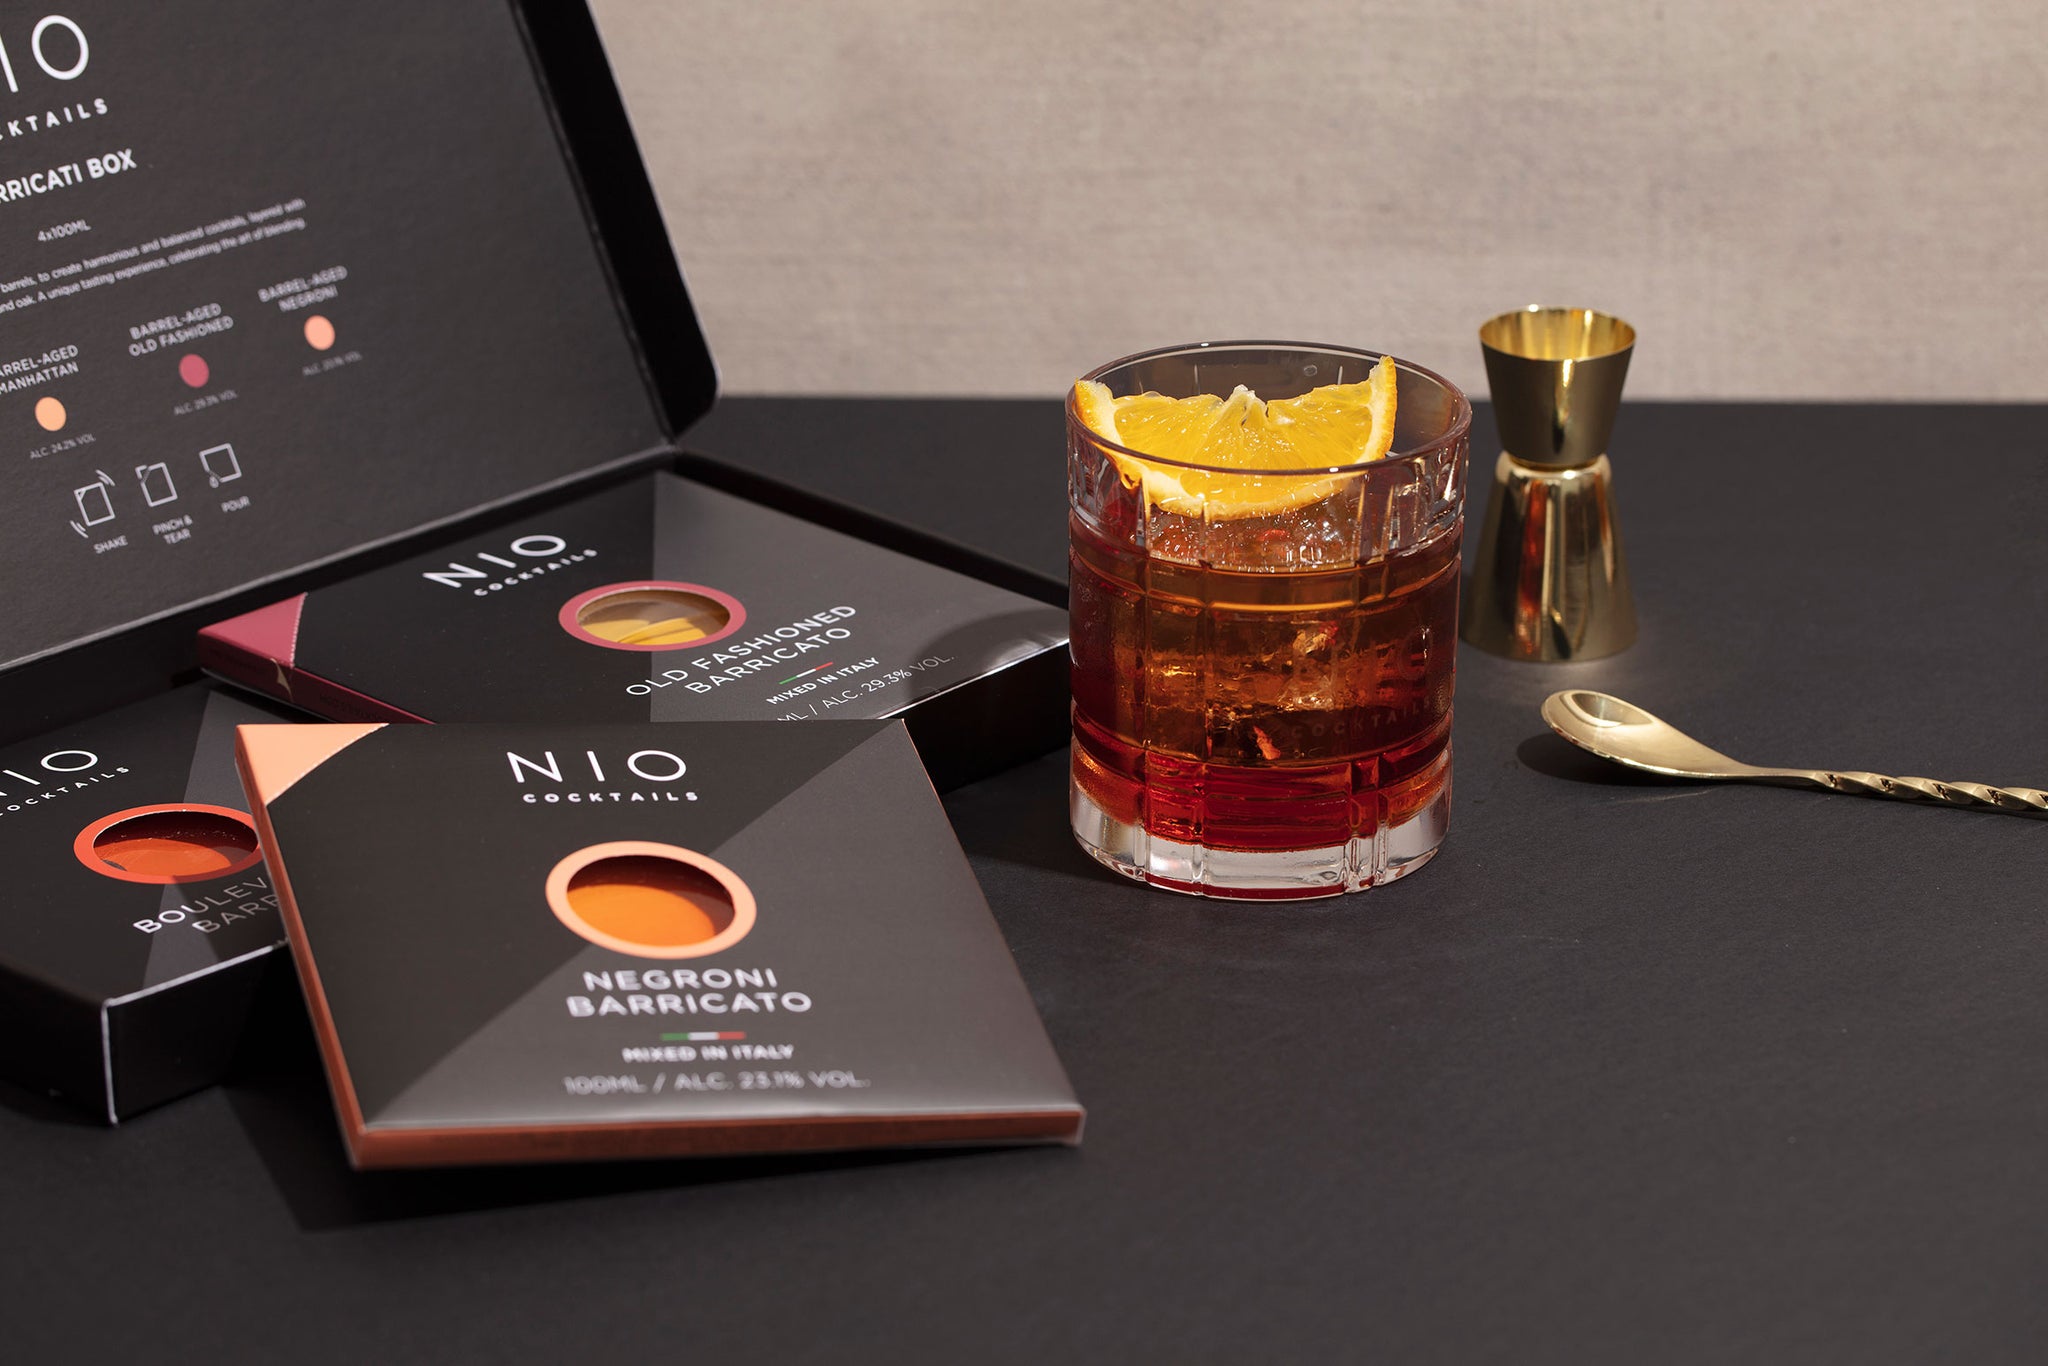 The four cornerstones of mixology, aged in oak barrels, for an even more harmonious flavour profile, with a softer, more rounded alcohol kick, enhanced by the vanilla, caramel and spicy notes of wood. A mixology trend for true connoisseurs and, until recently, a select few international cocktail bars.